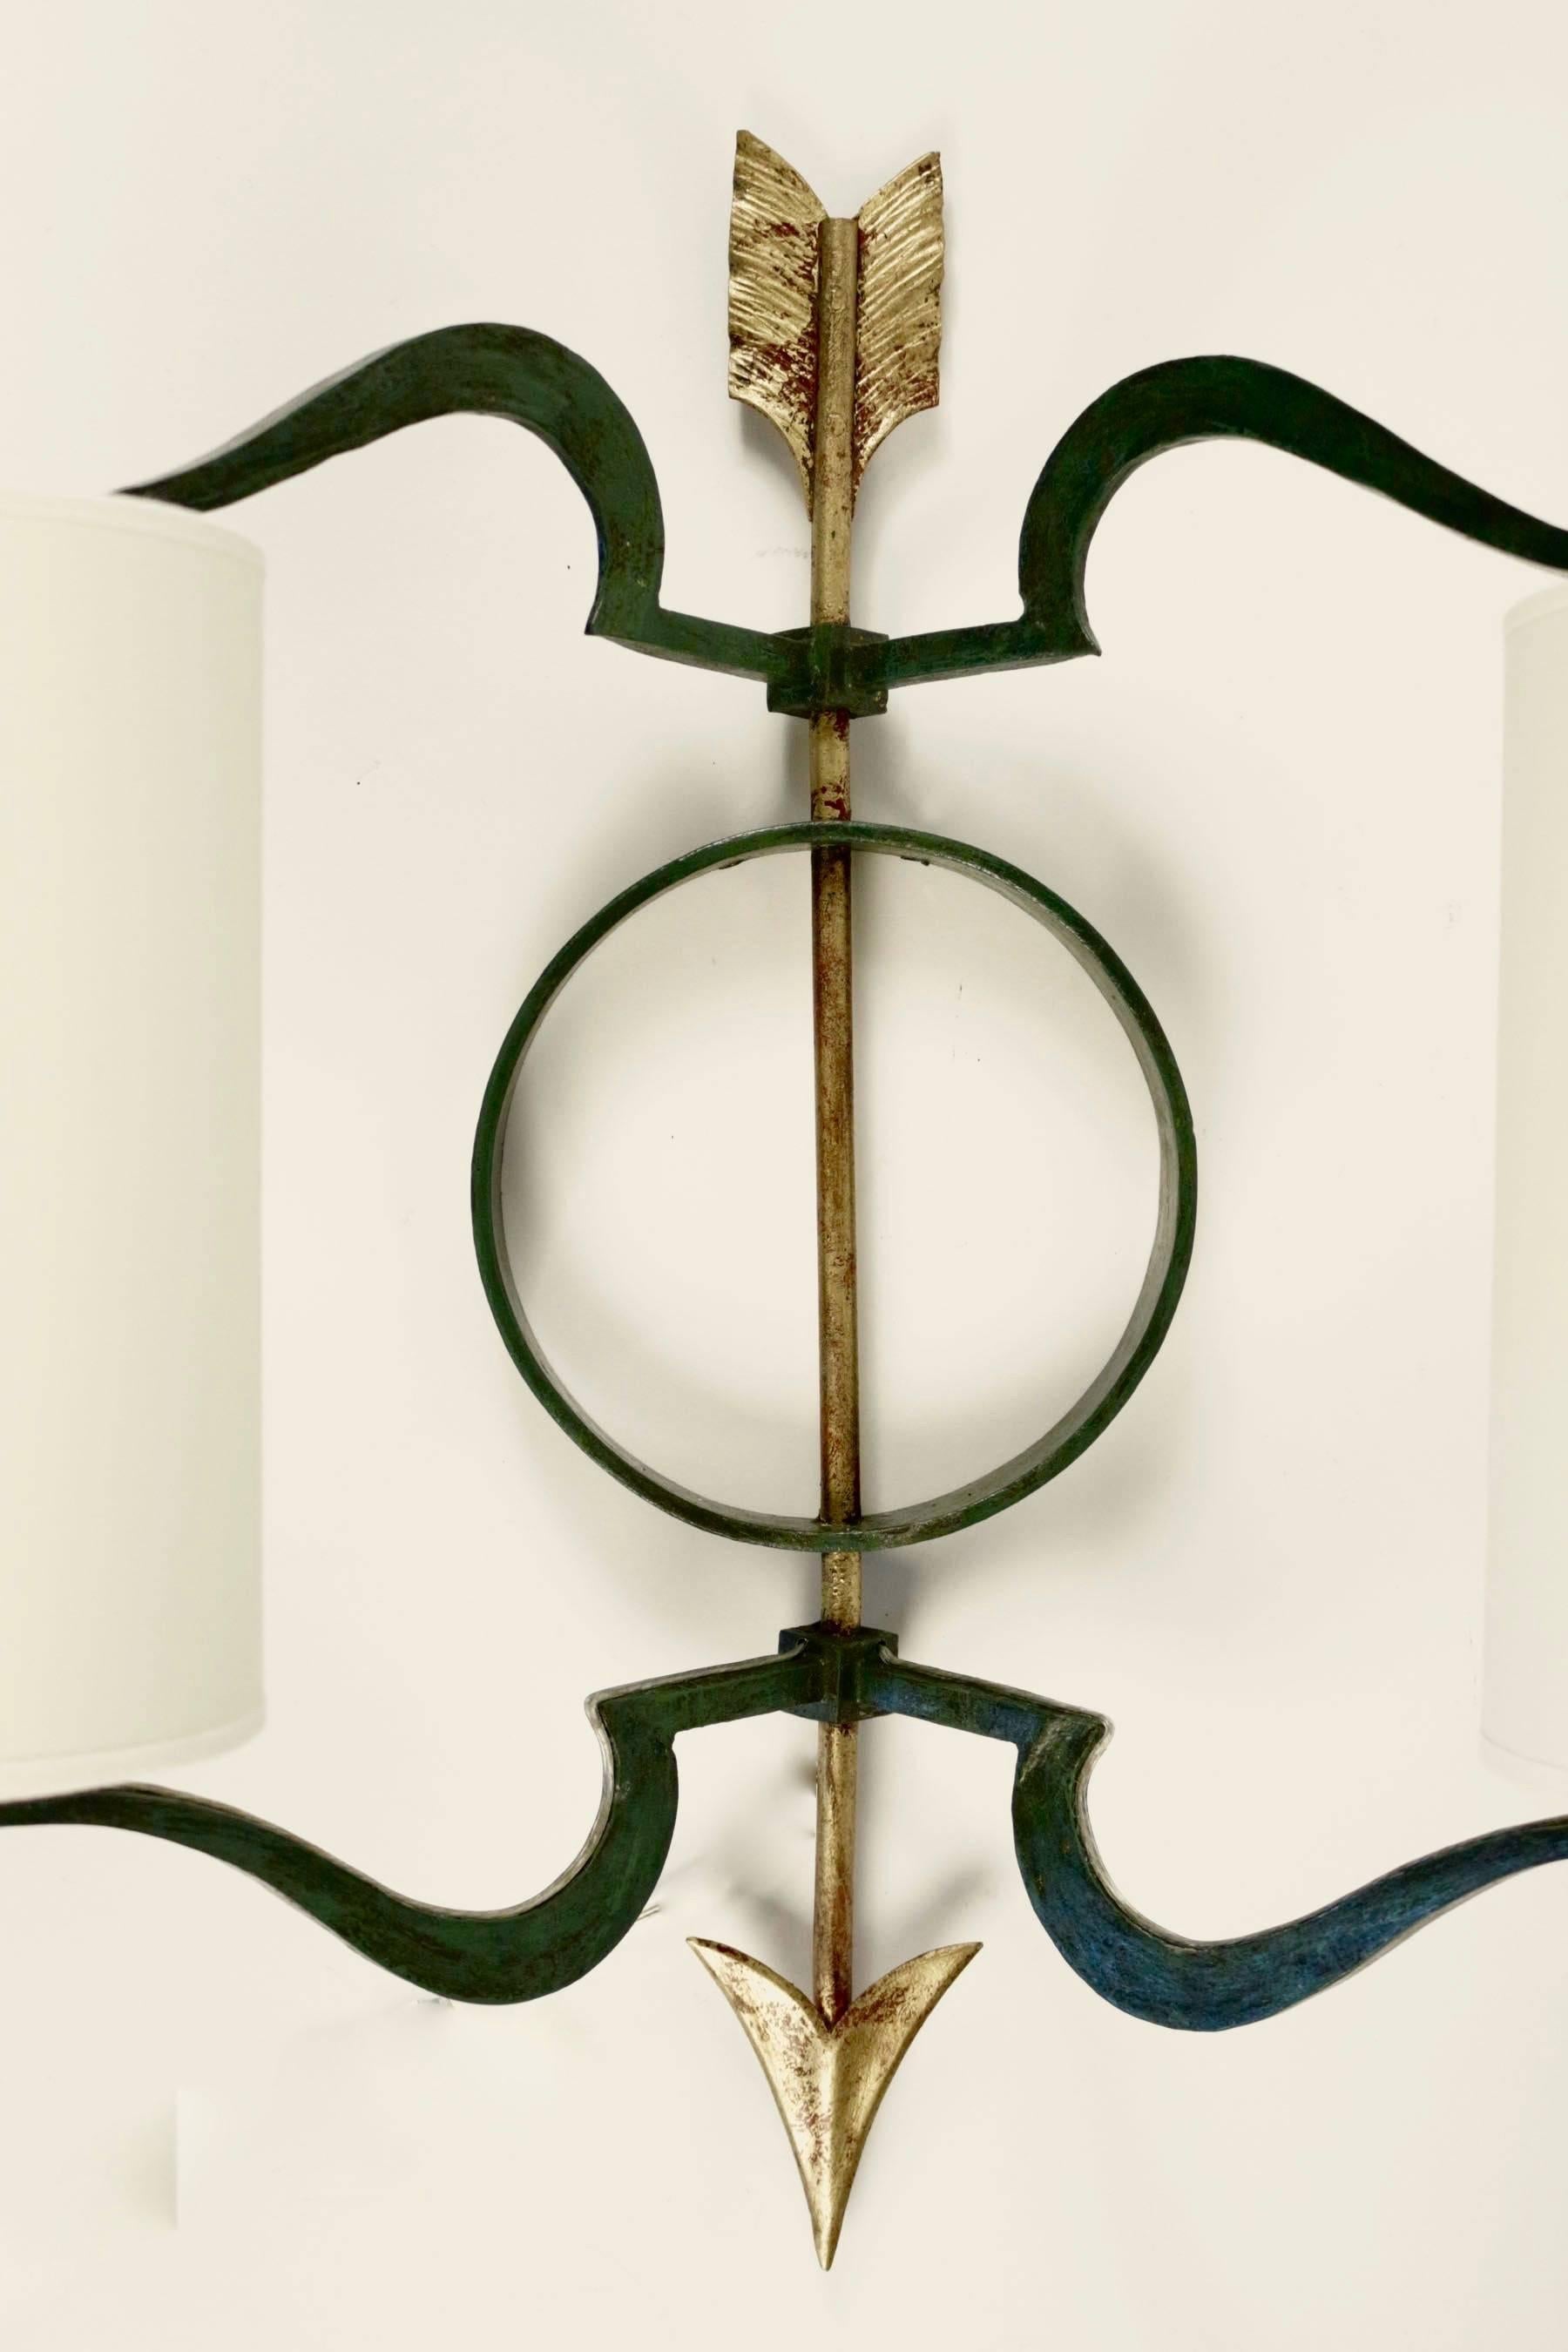 Large Arrow pair of sconces, Jacques Tournus, circa 1951

Each sconce is composed by one central gilded bronze arrow which support two cylindrical lampshades in white ivory cotton.

The arms are half heart shaped in verdigris bronze. The central